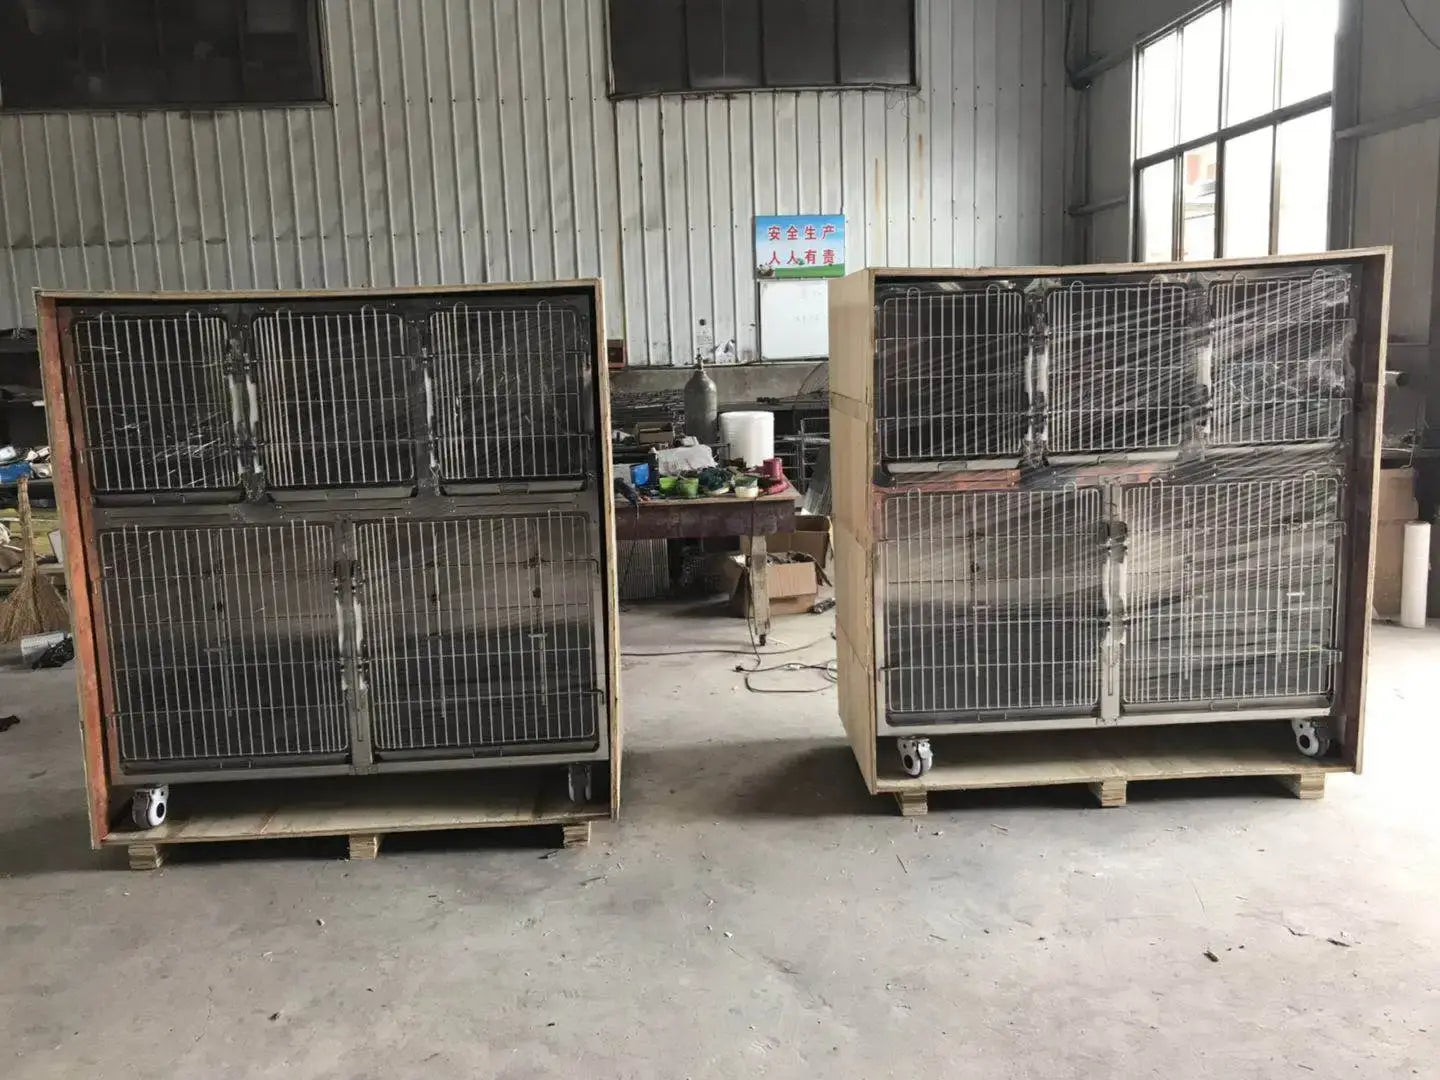 Veterinary Five parts Cage Bank I Modular Cage banks For Dog